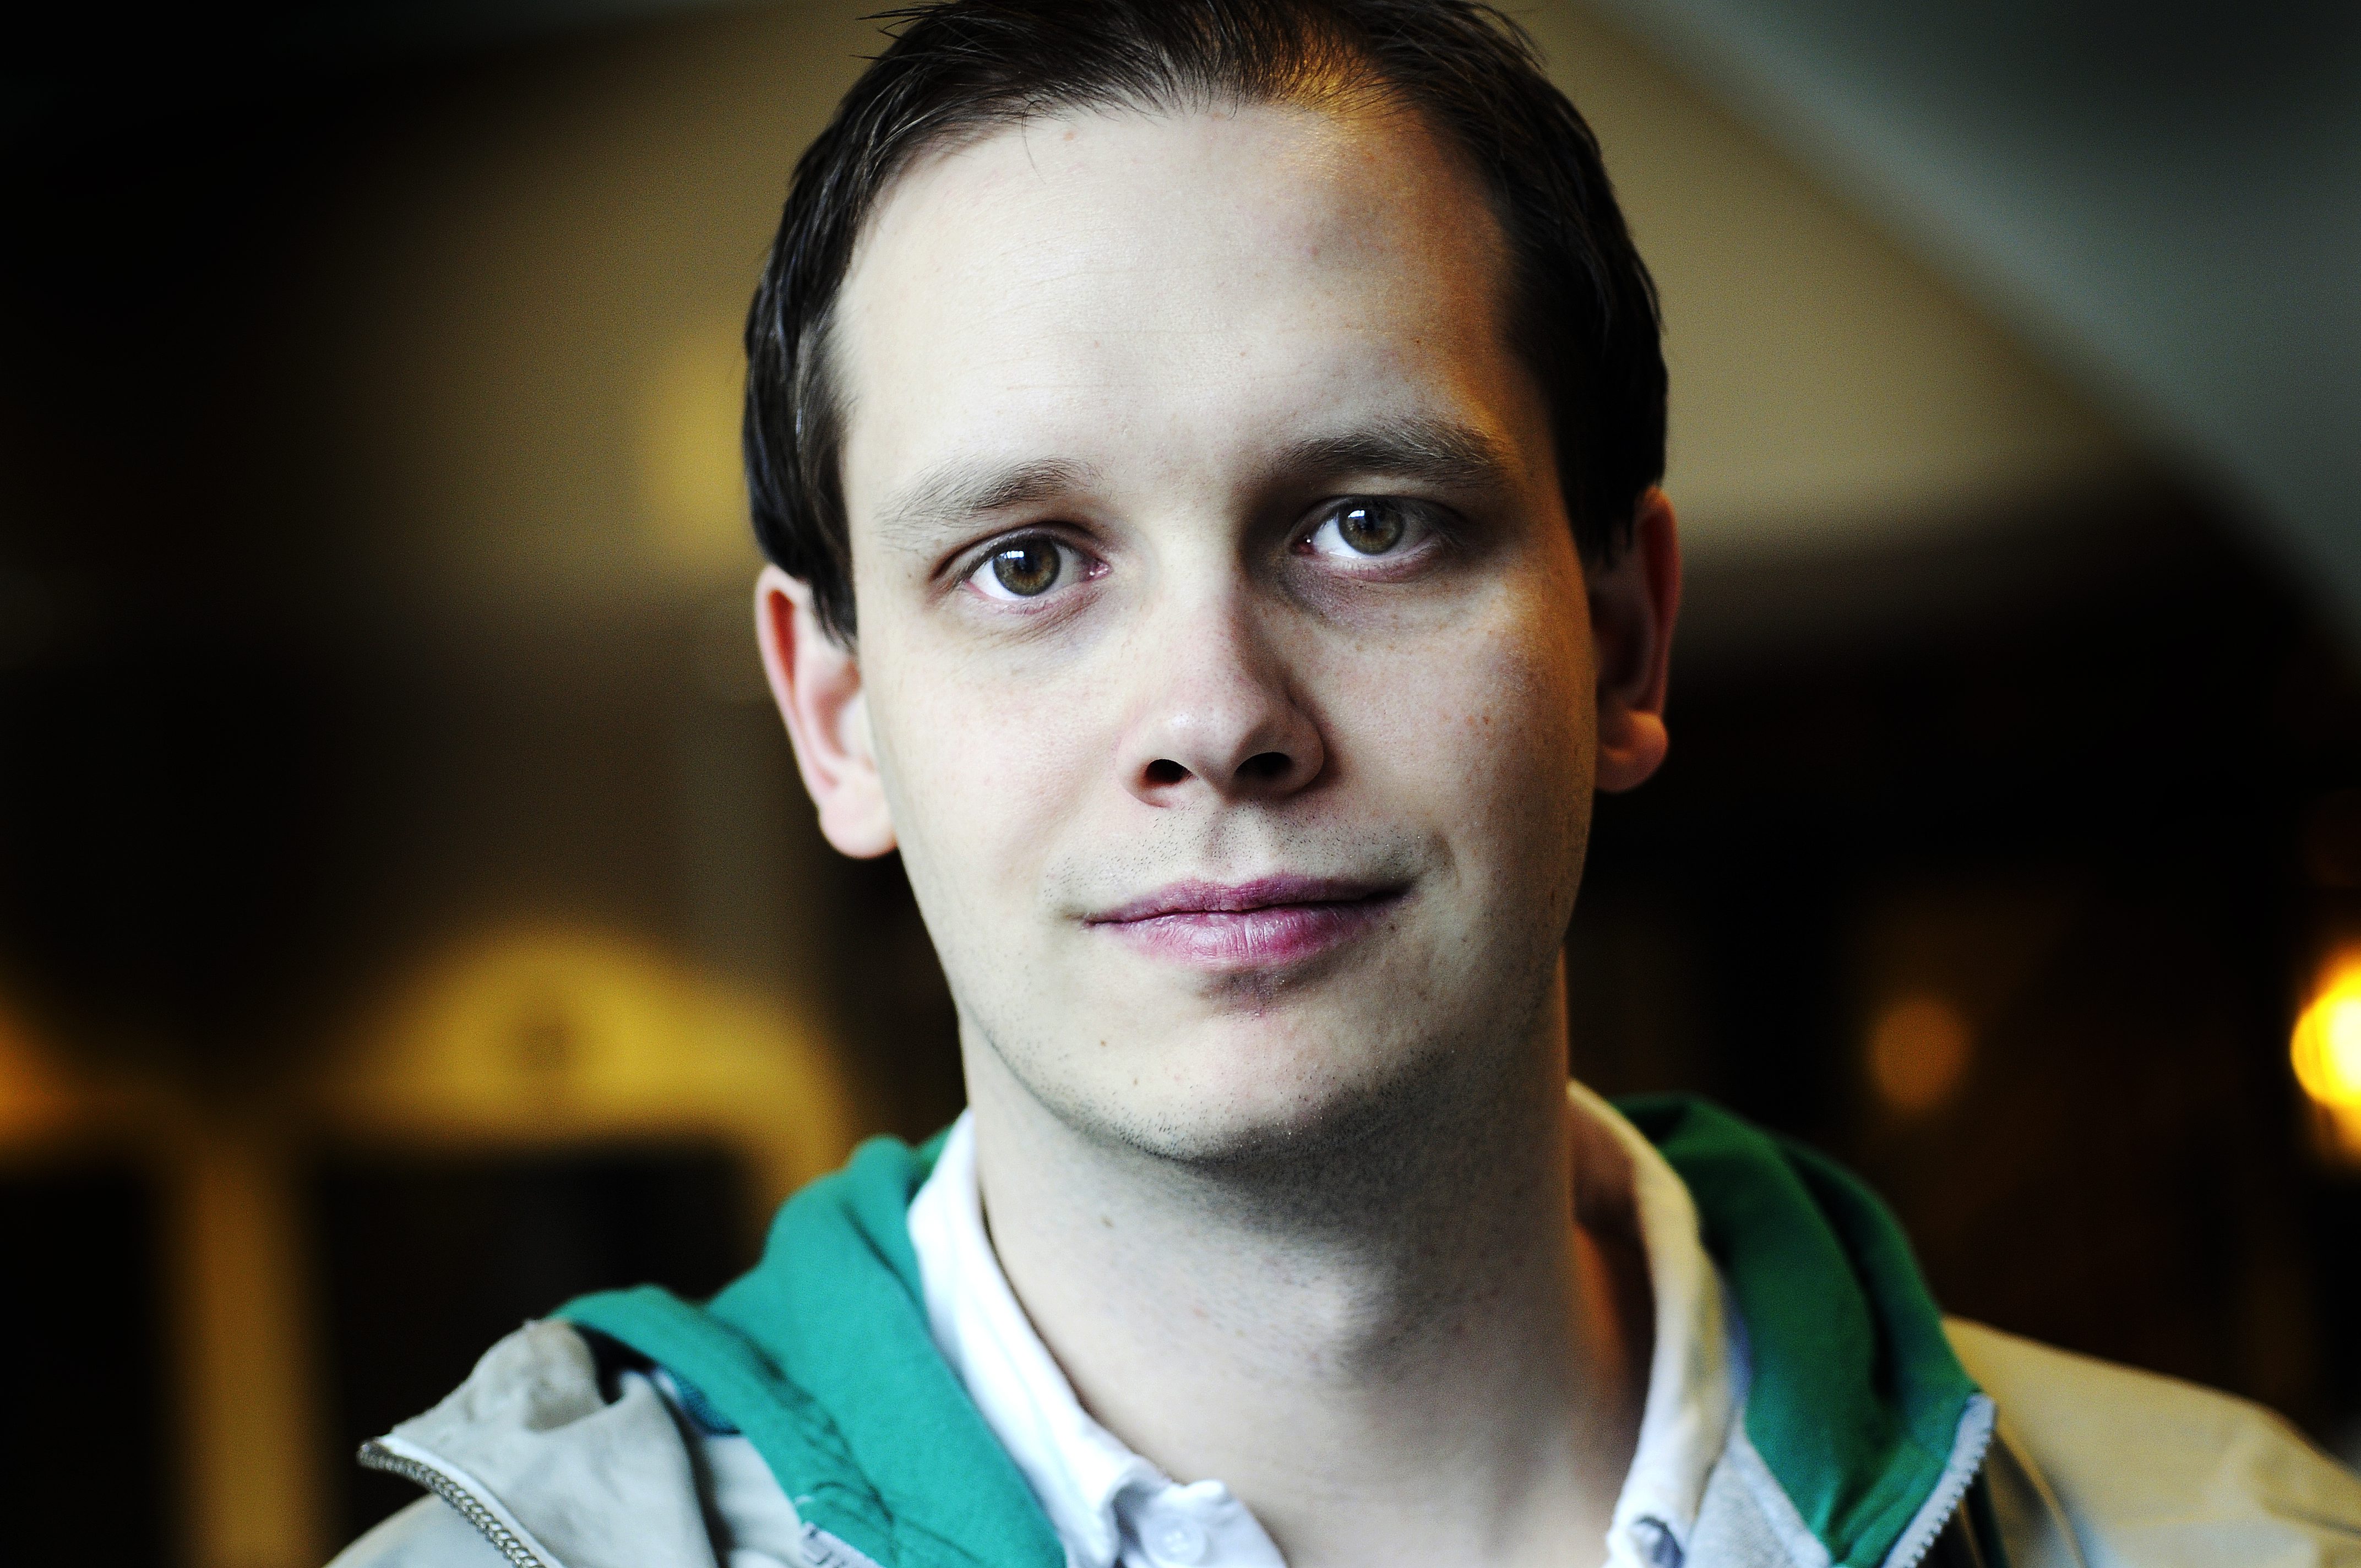 The Pirate Bay, Fildelning, Peter Sunde